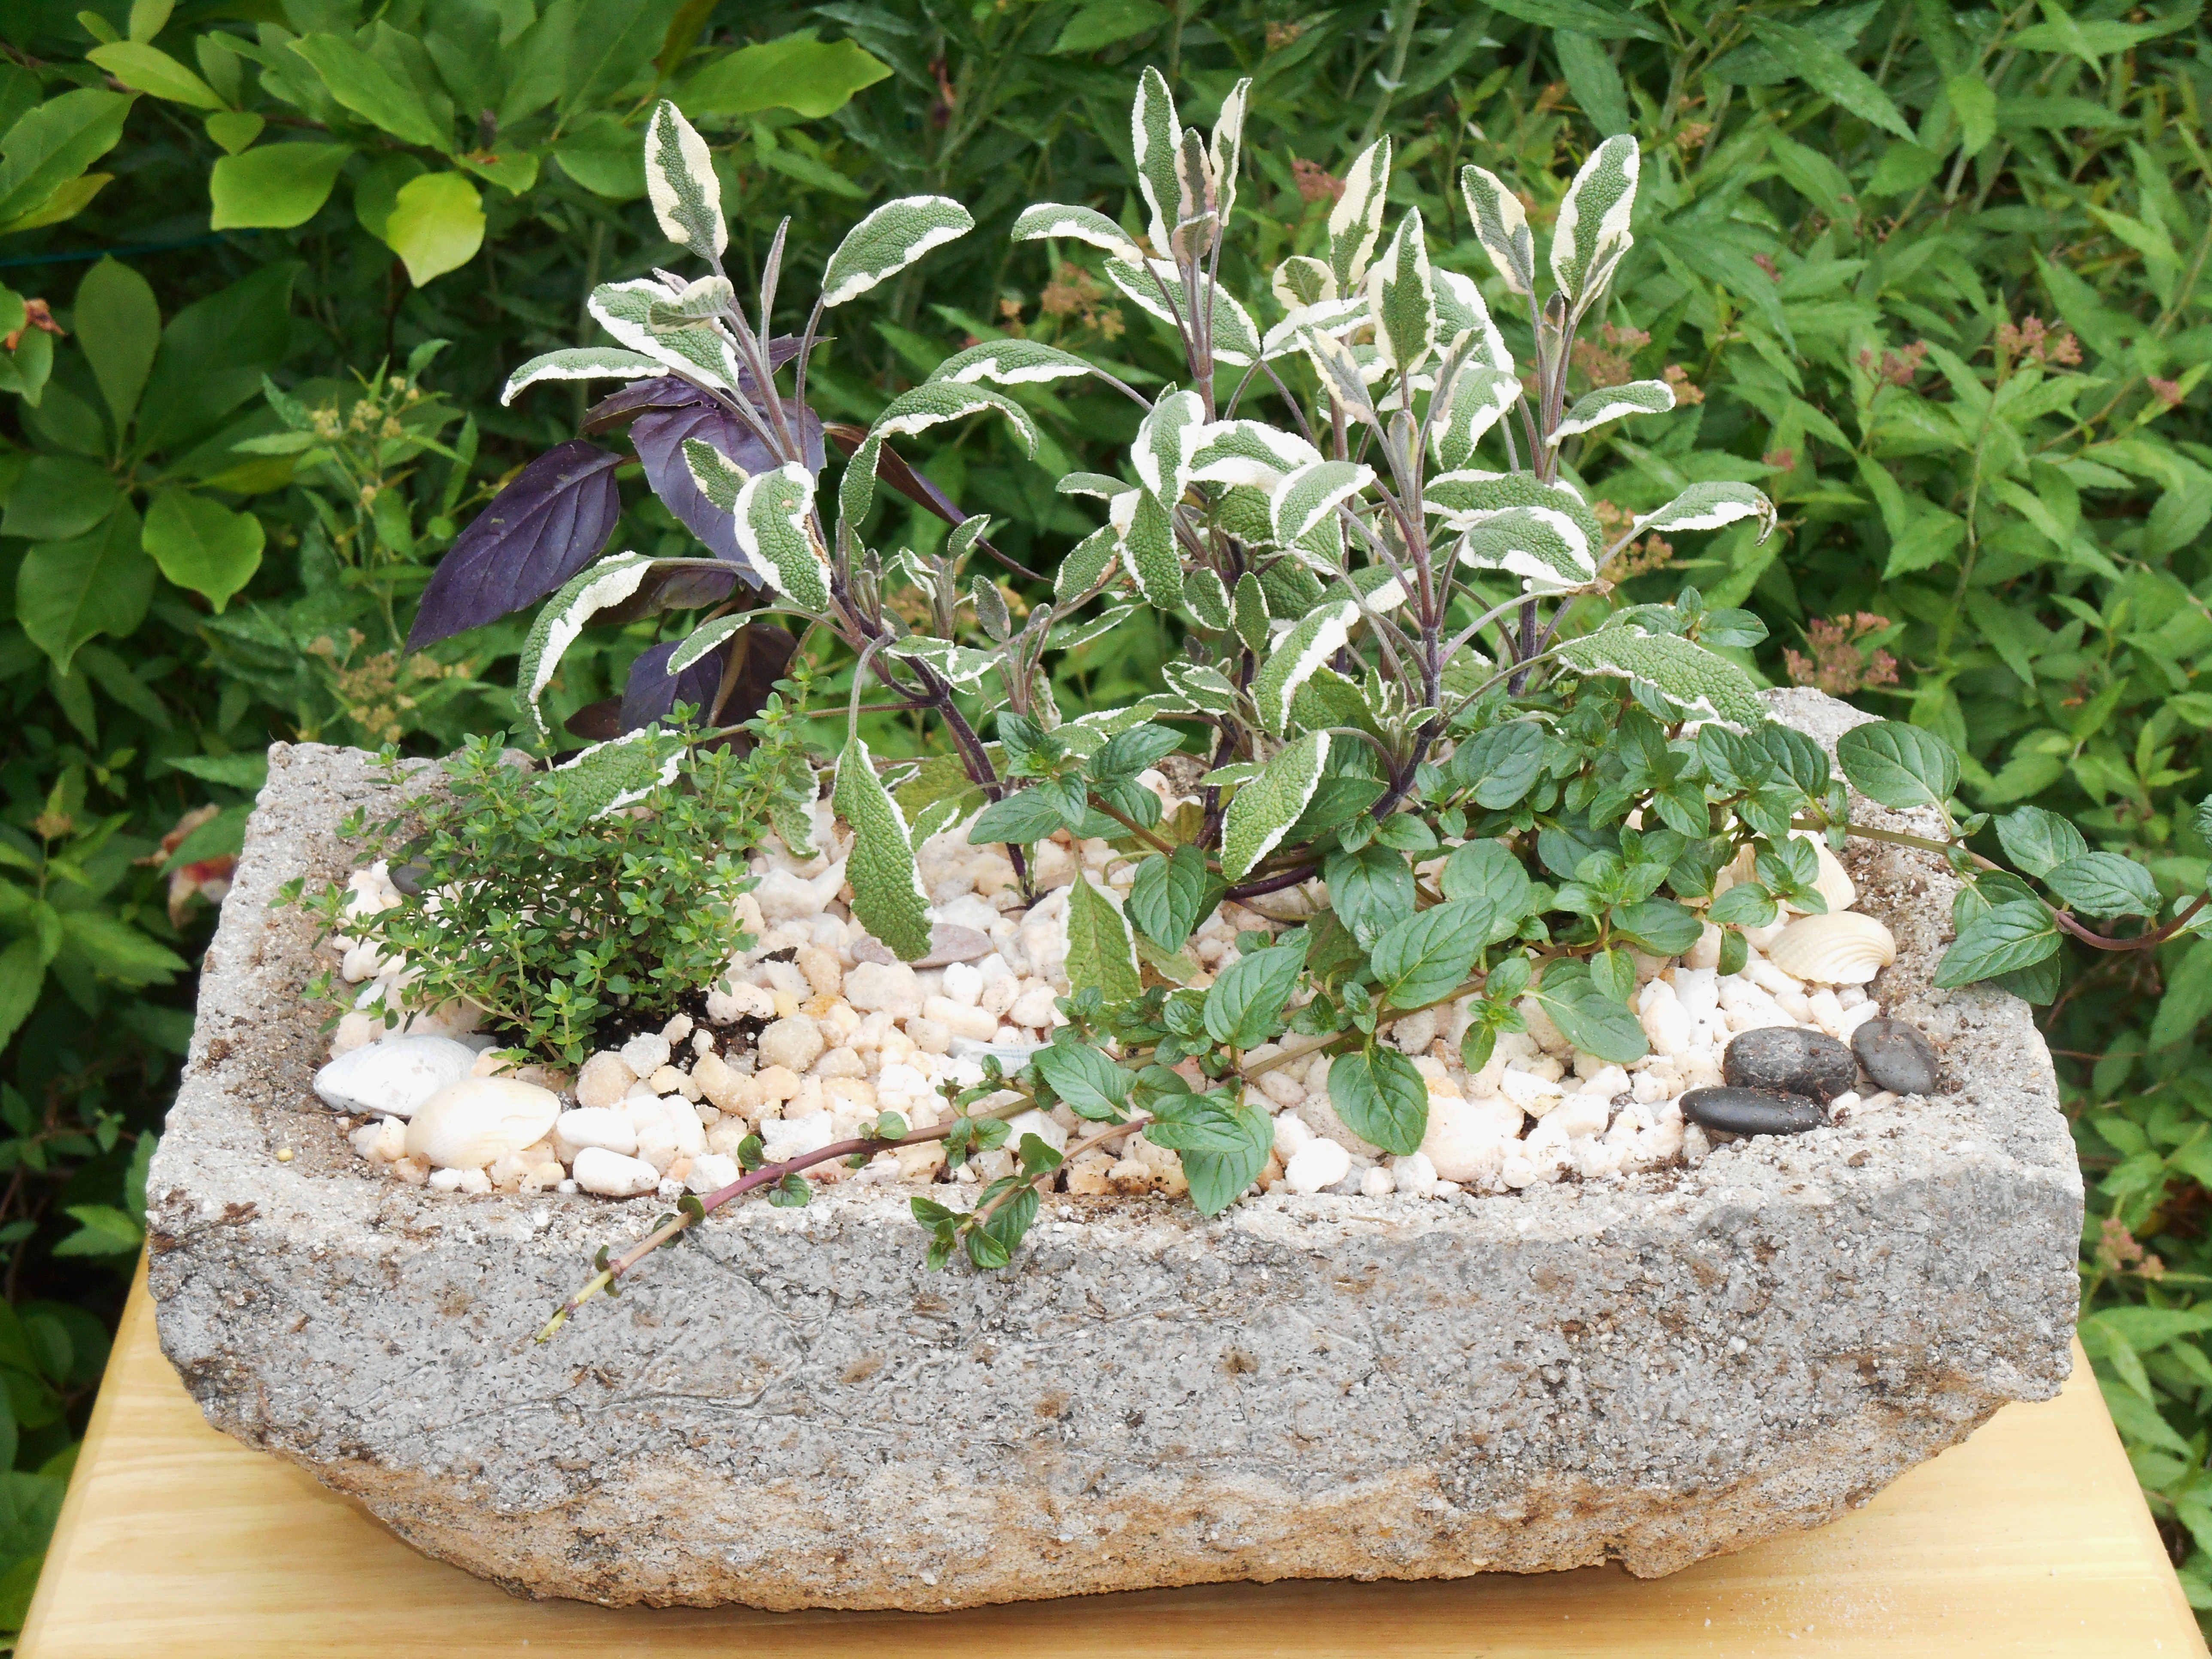 This hypertufa potted herb garden will be sold this Saturday.